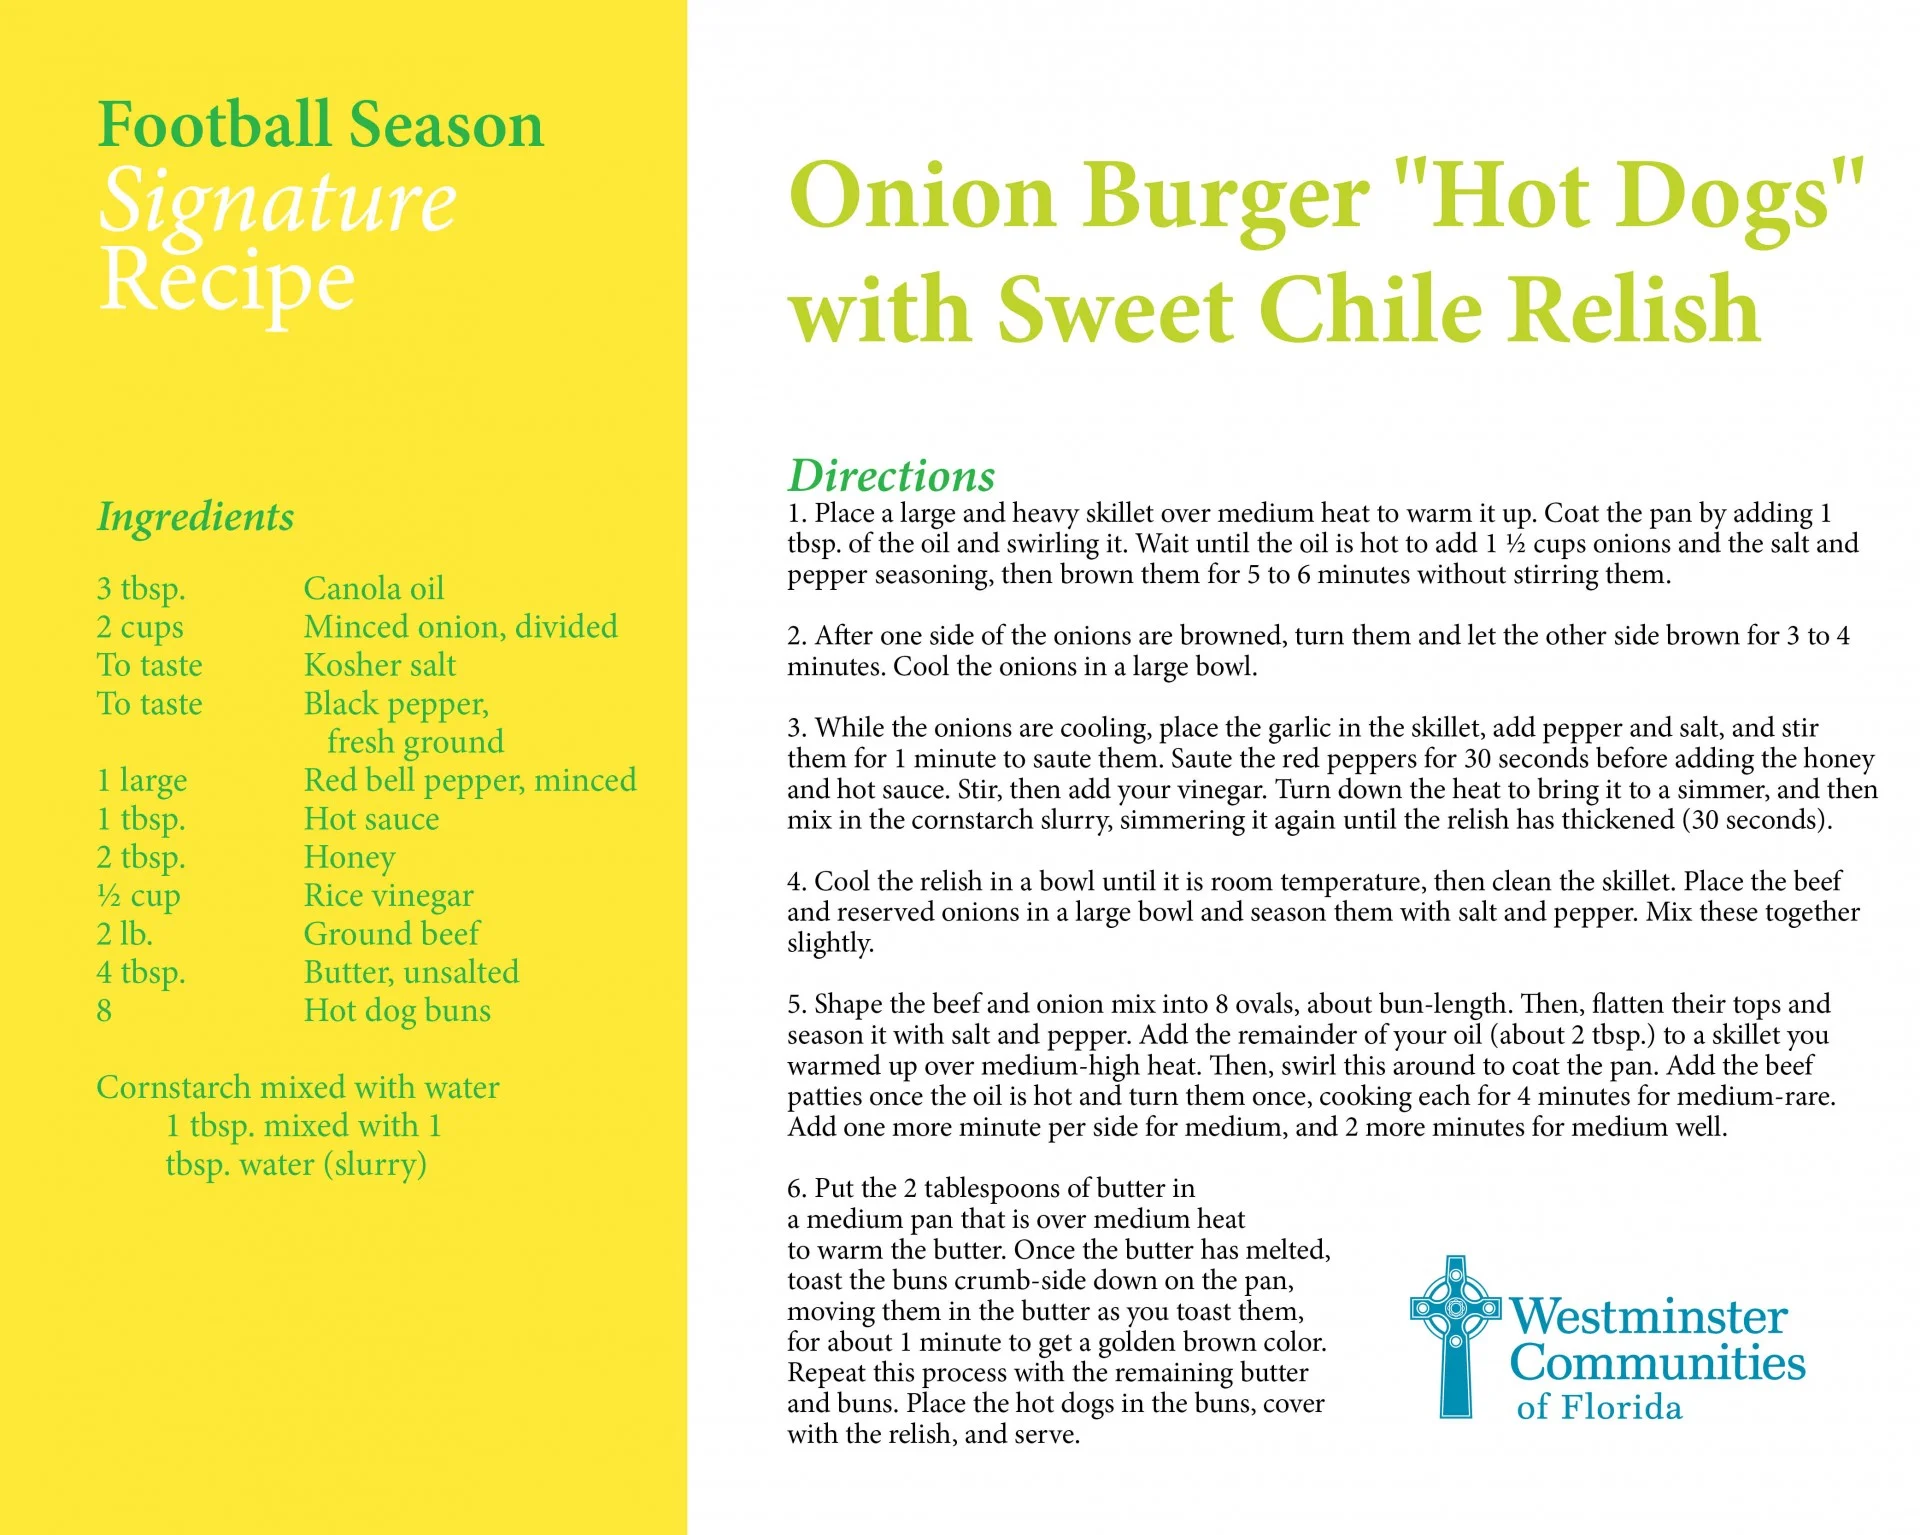 Our Signature Onion Burger Hot Dogs with Sweet Chile Relish